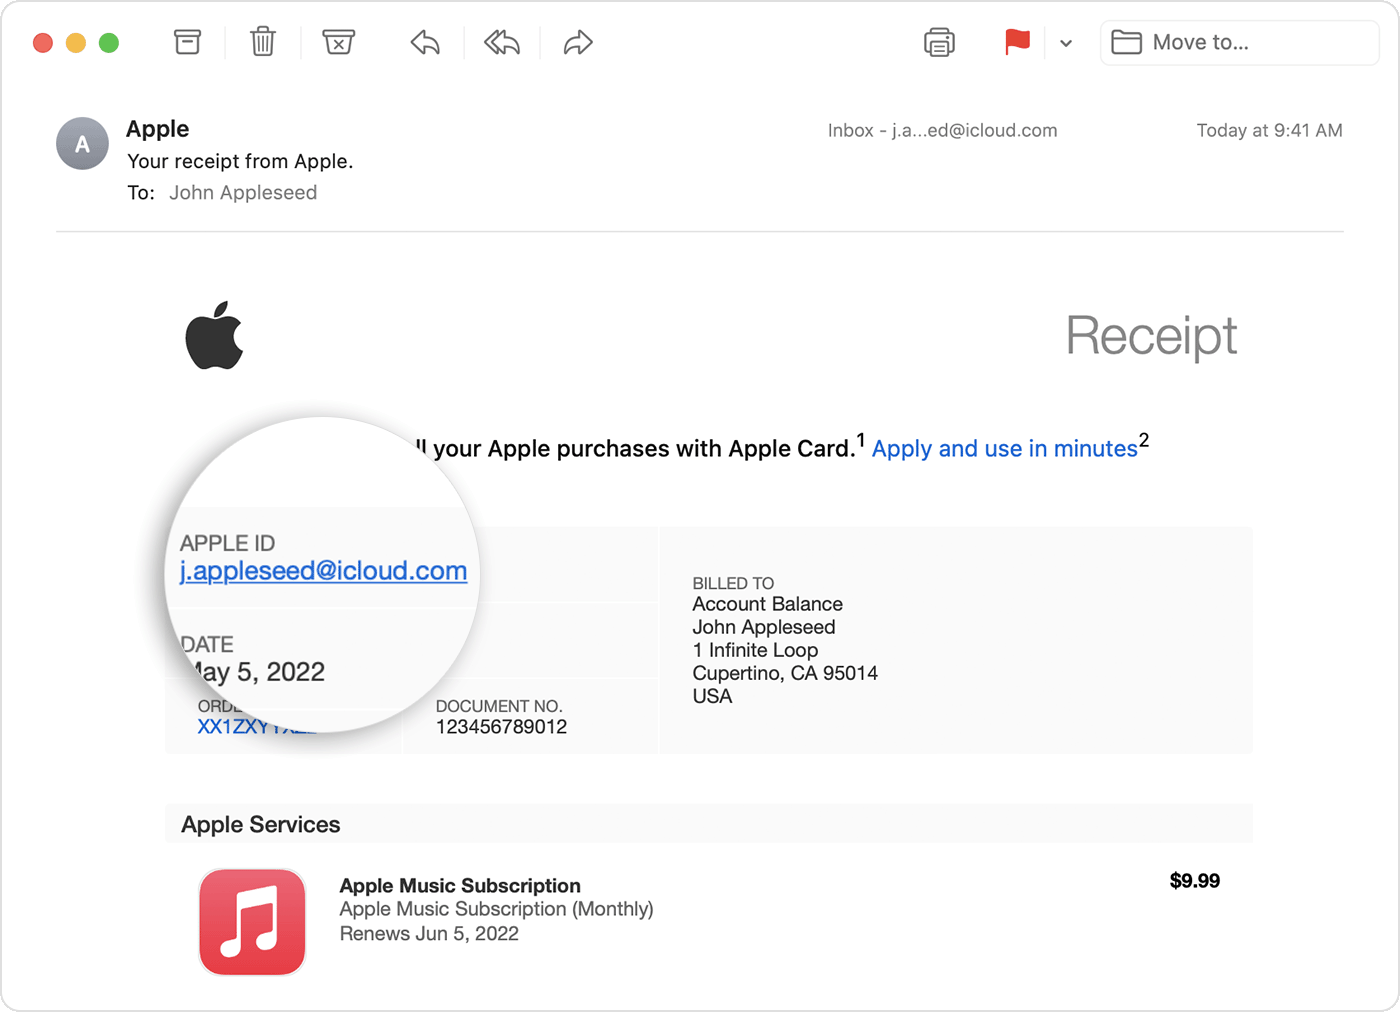 An email receipt from Apple showing the Apple ID of the person who bought the Apple Music subscription.